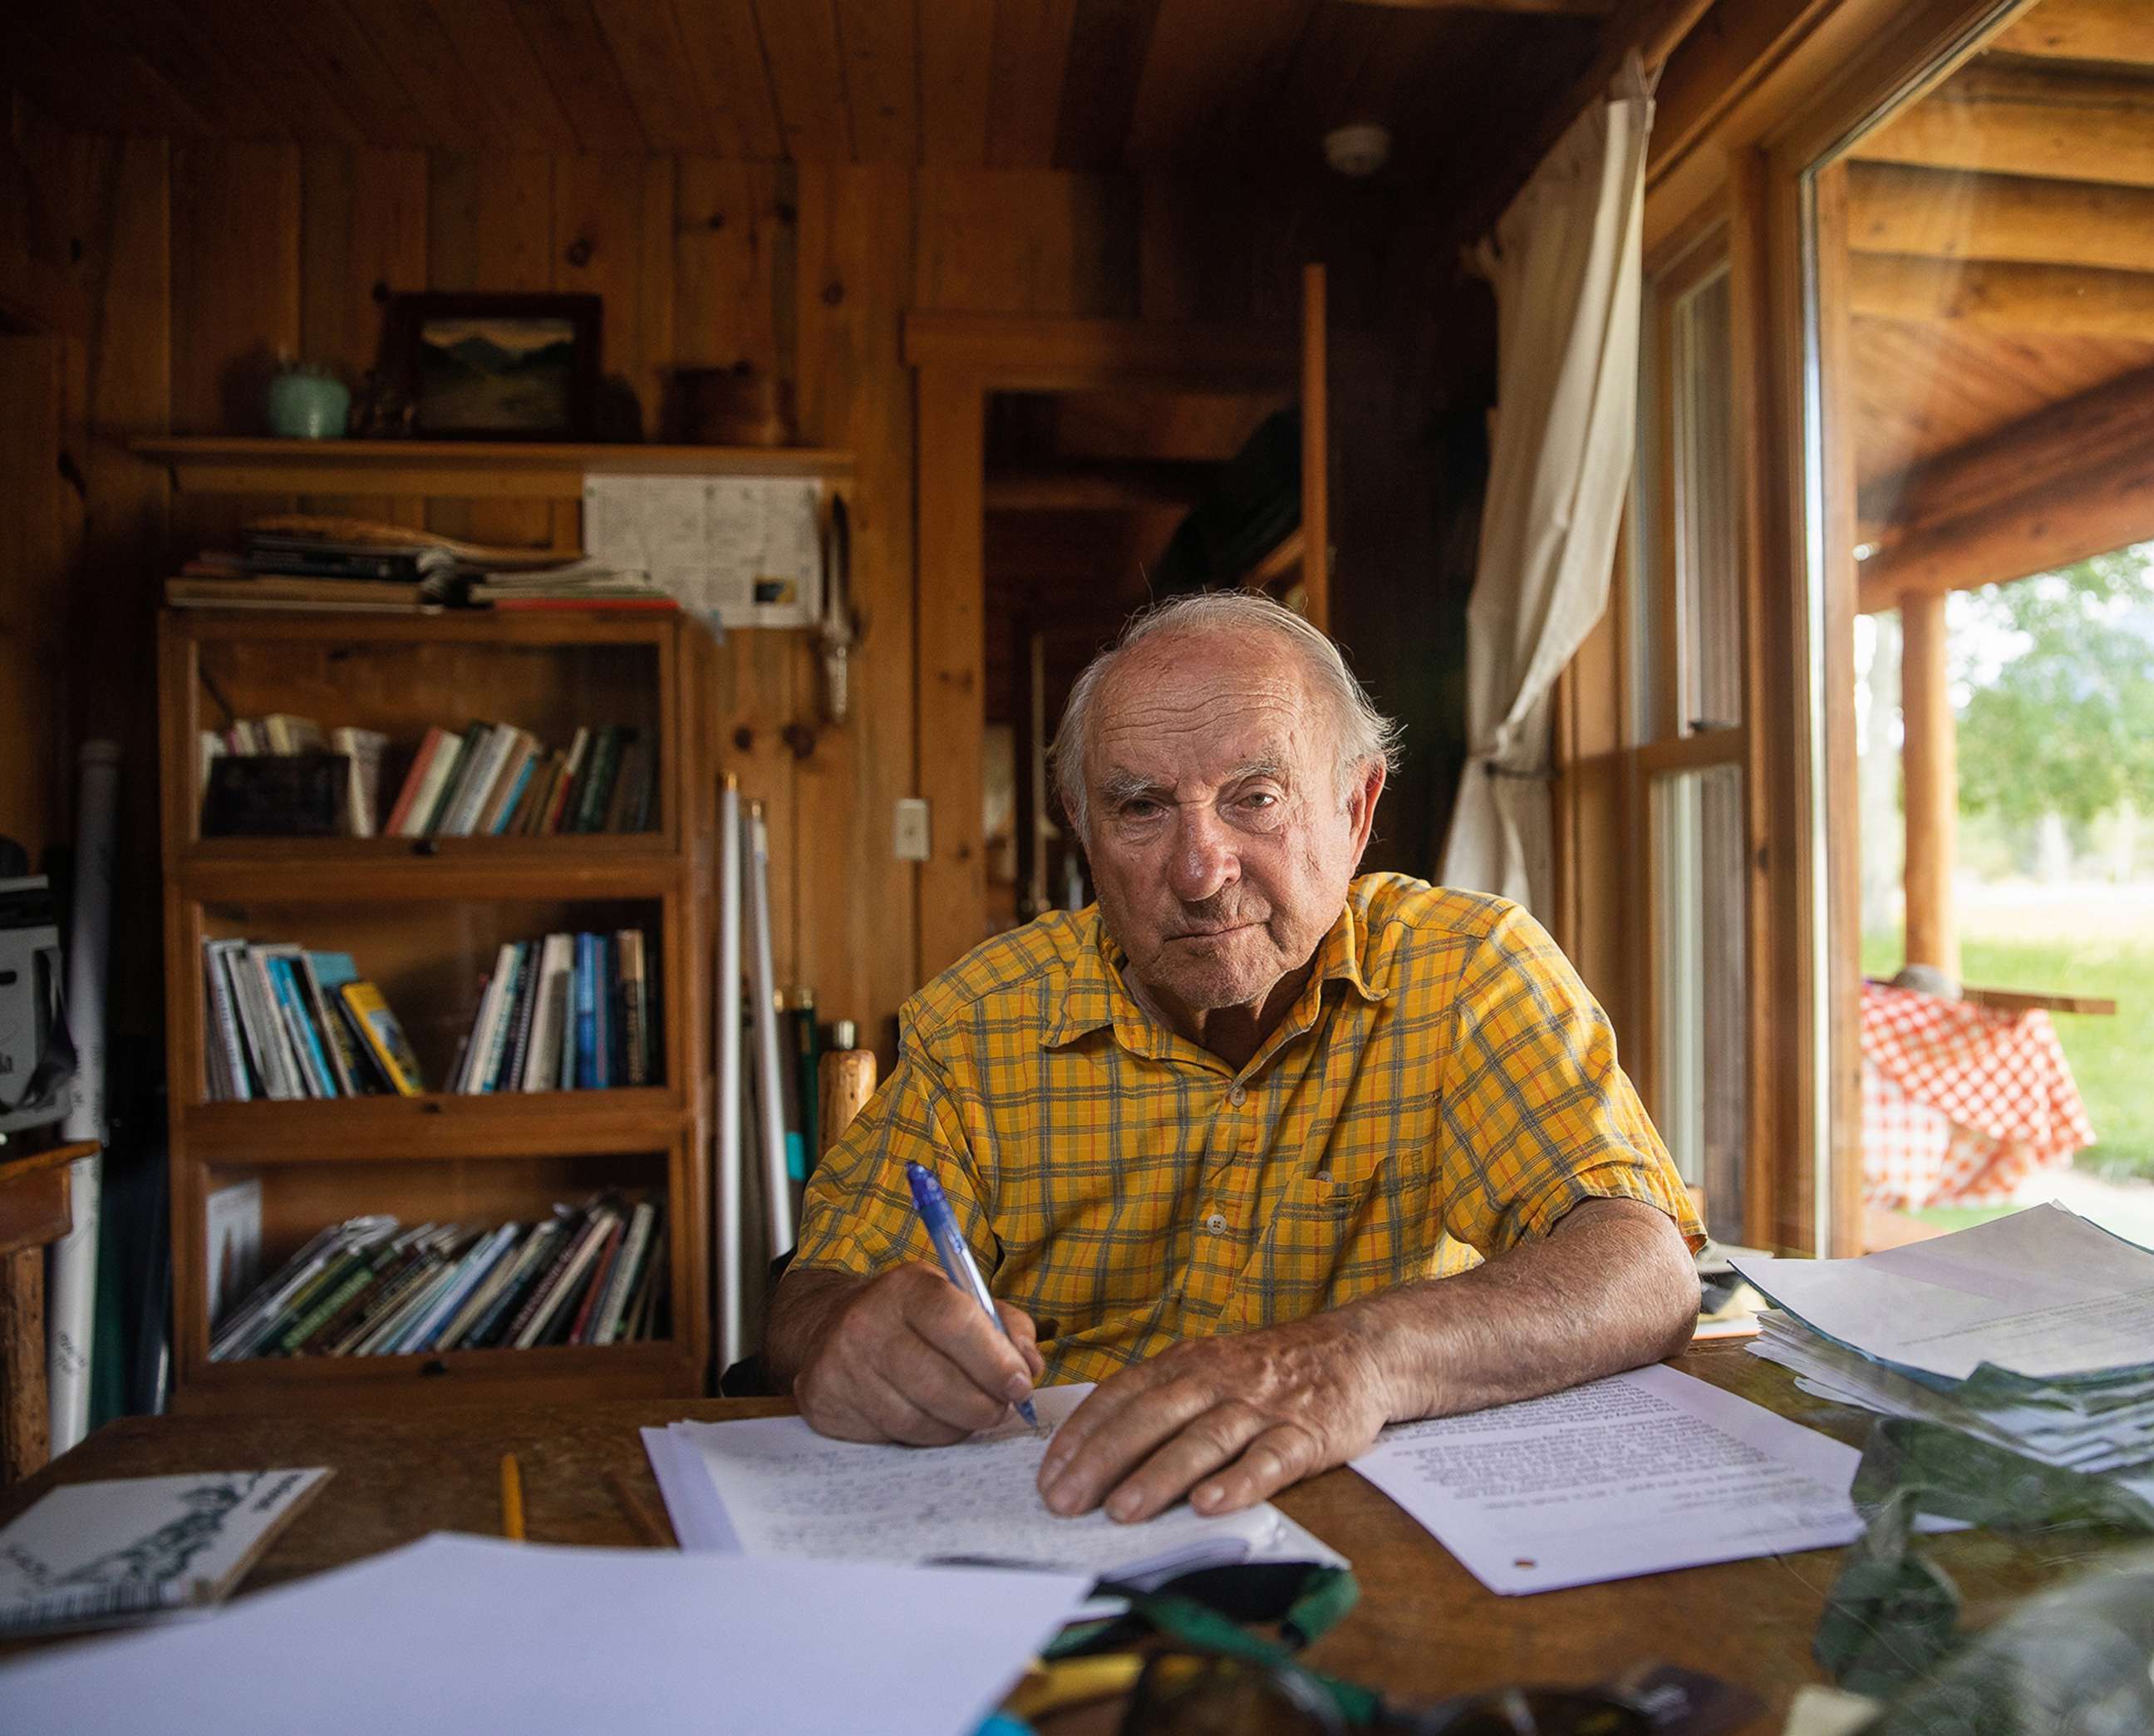 PHOTO: Patagonia founder Yvon Chouinard is shown at home in Wyoming.